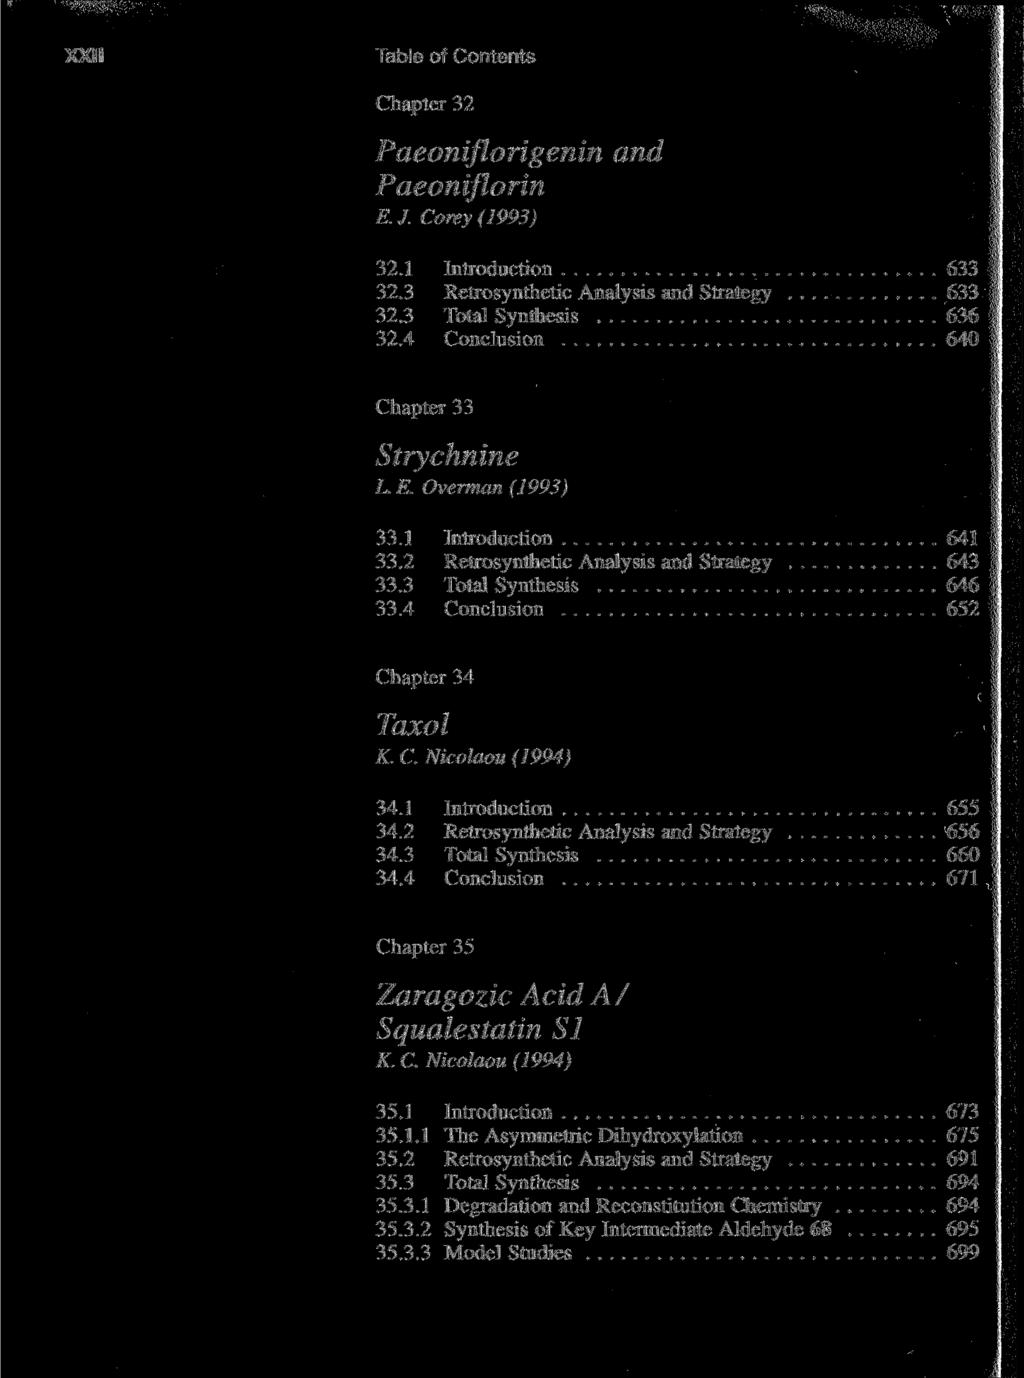 XXII Table of Contents Chapter 32 Paeoniflorigenin Paeoniflorin E.J. Corey(1993) and 32.1 Introduction 633 32.3 Retrosynthetic Analysis and Strategy 633 32.3 Total Synthesis 636 32.